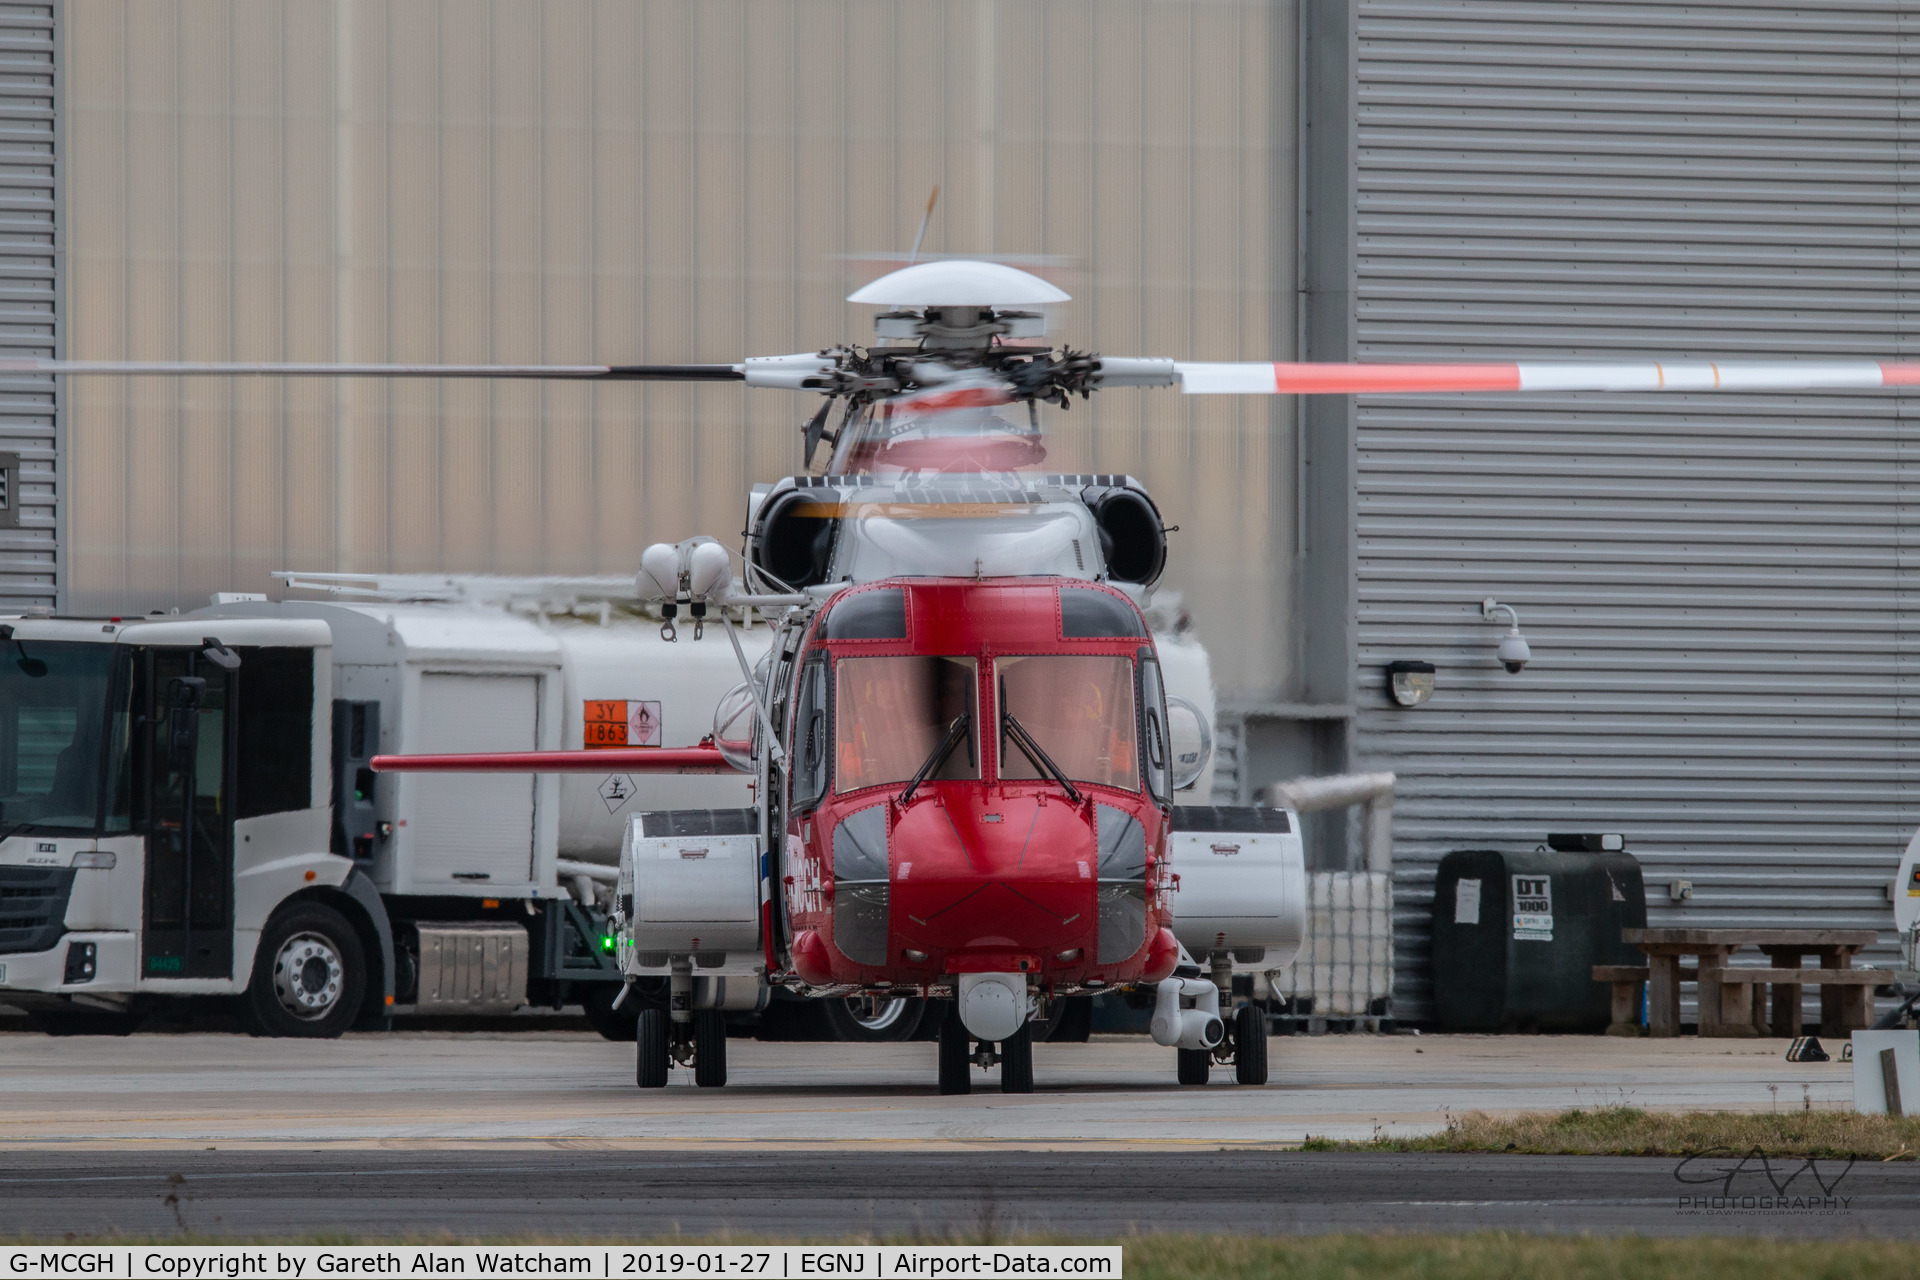 G-MCGH, 2014 Sikorsky S-92A C/N 920234, G-MCGH sat outside the Bristow Hanger